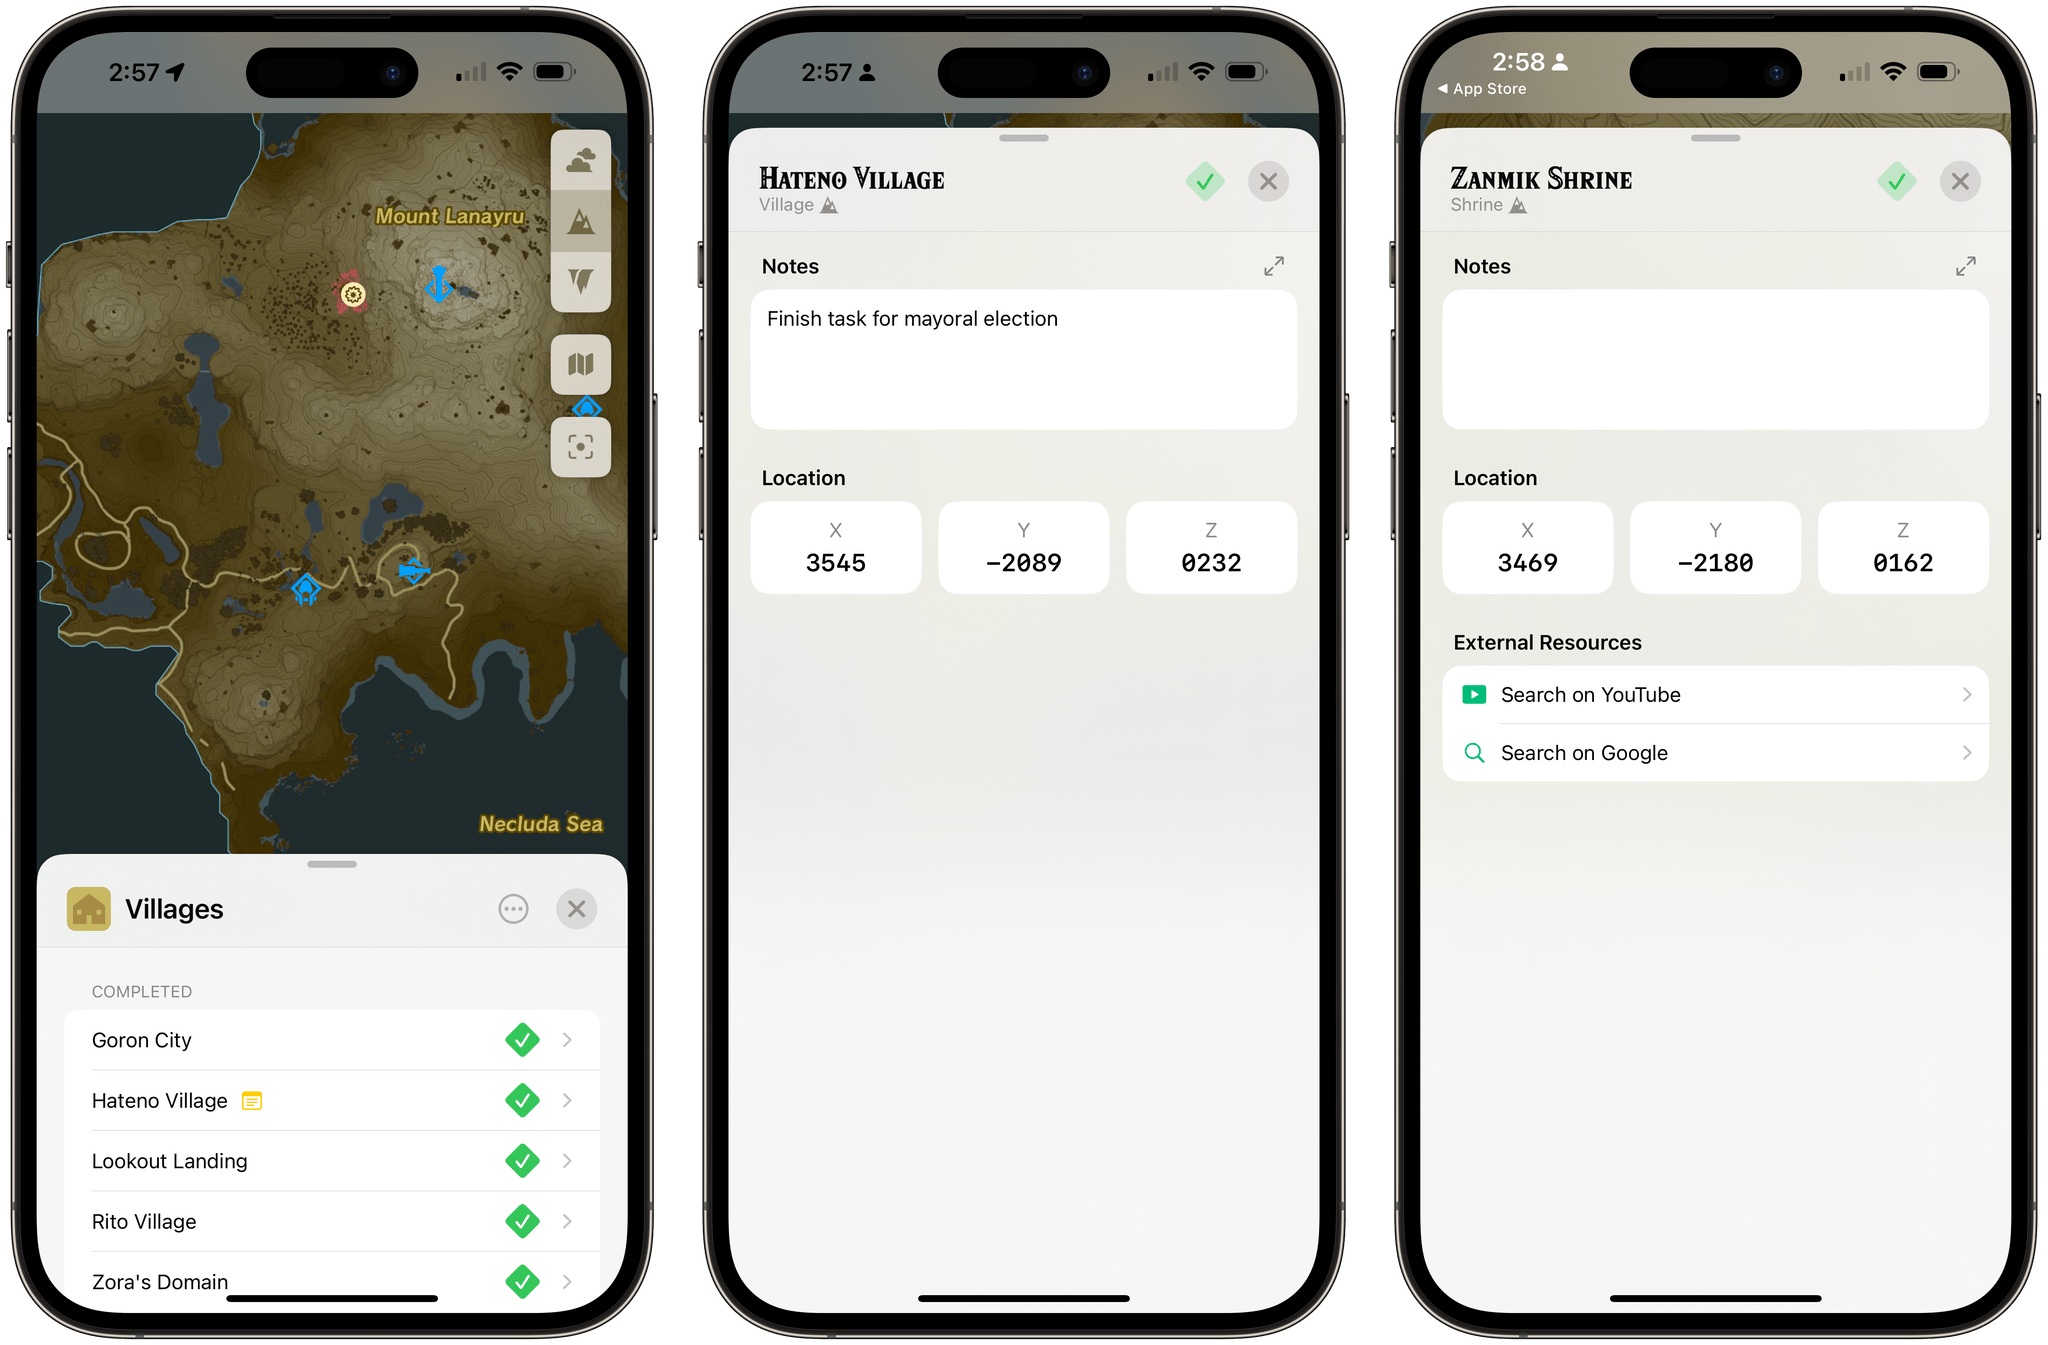 Location pages include coordinates, a notes field, and useful links to solve shrines.